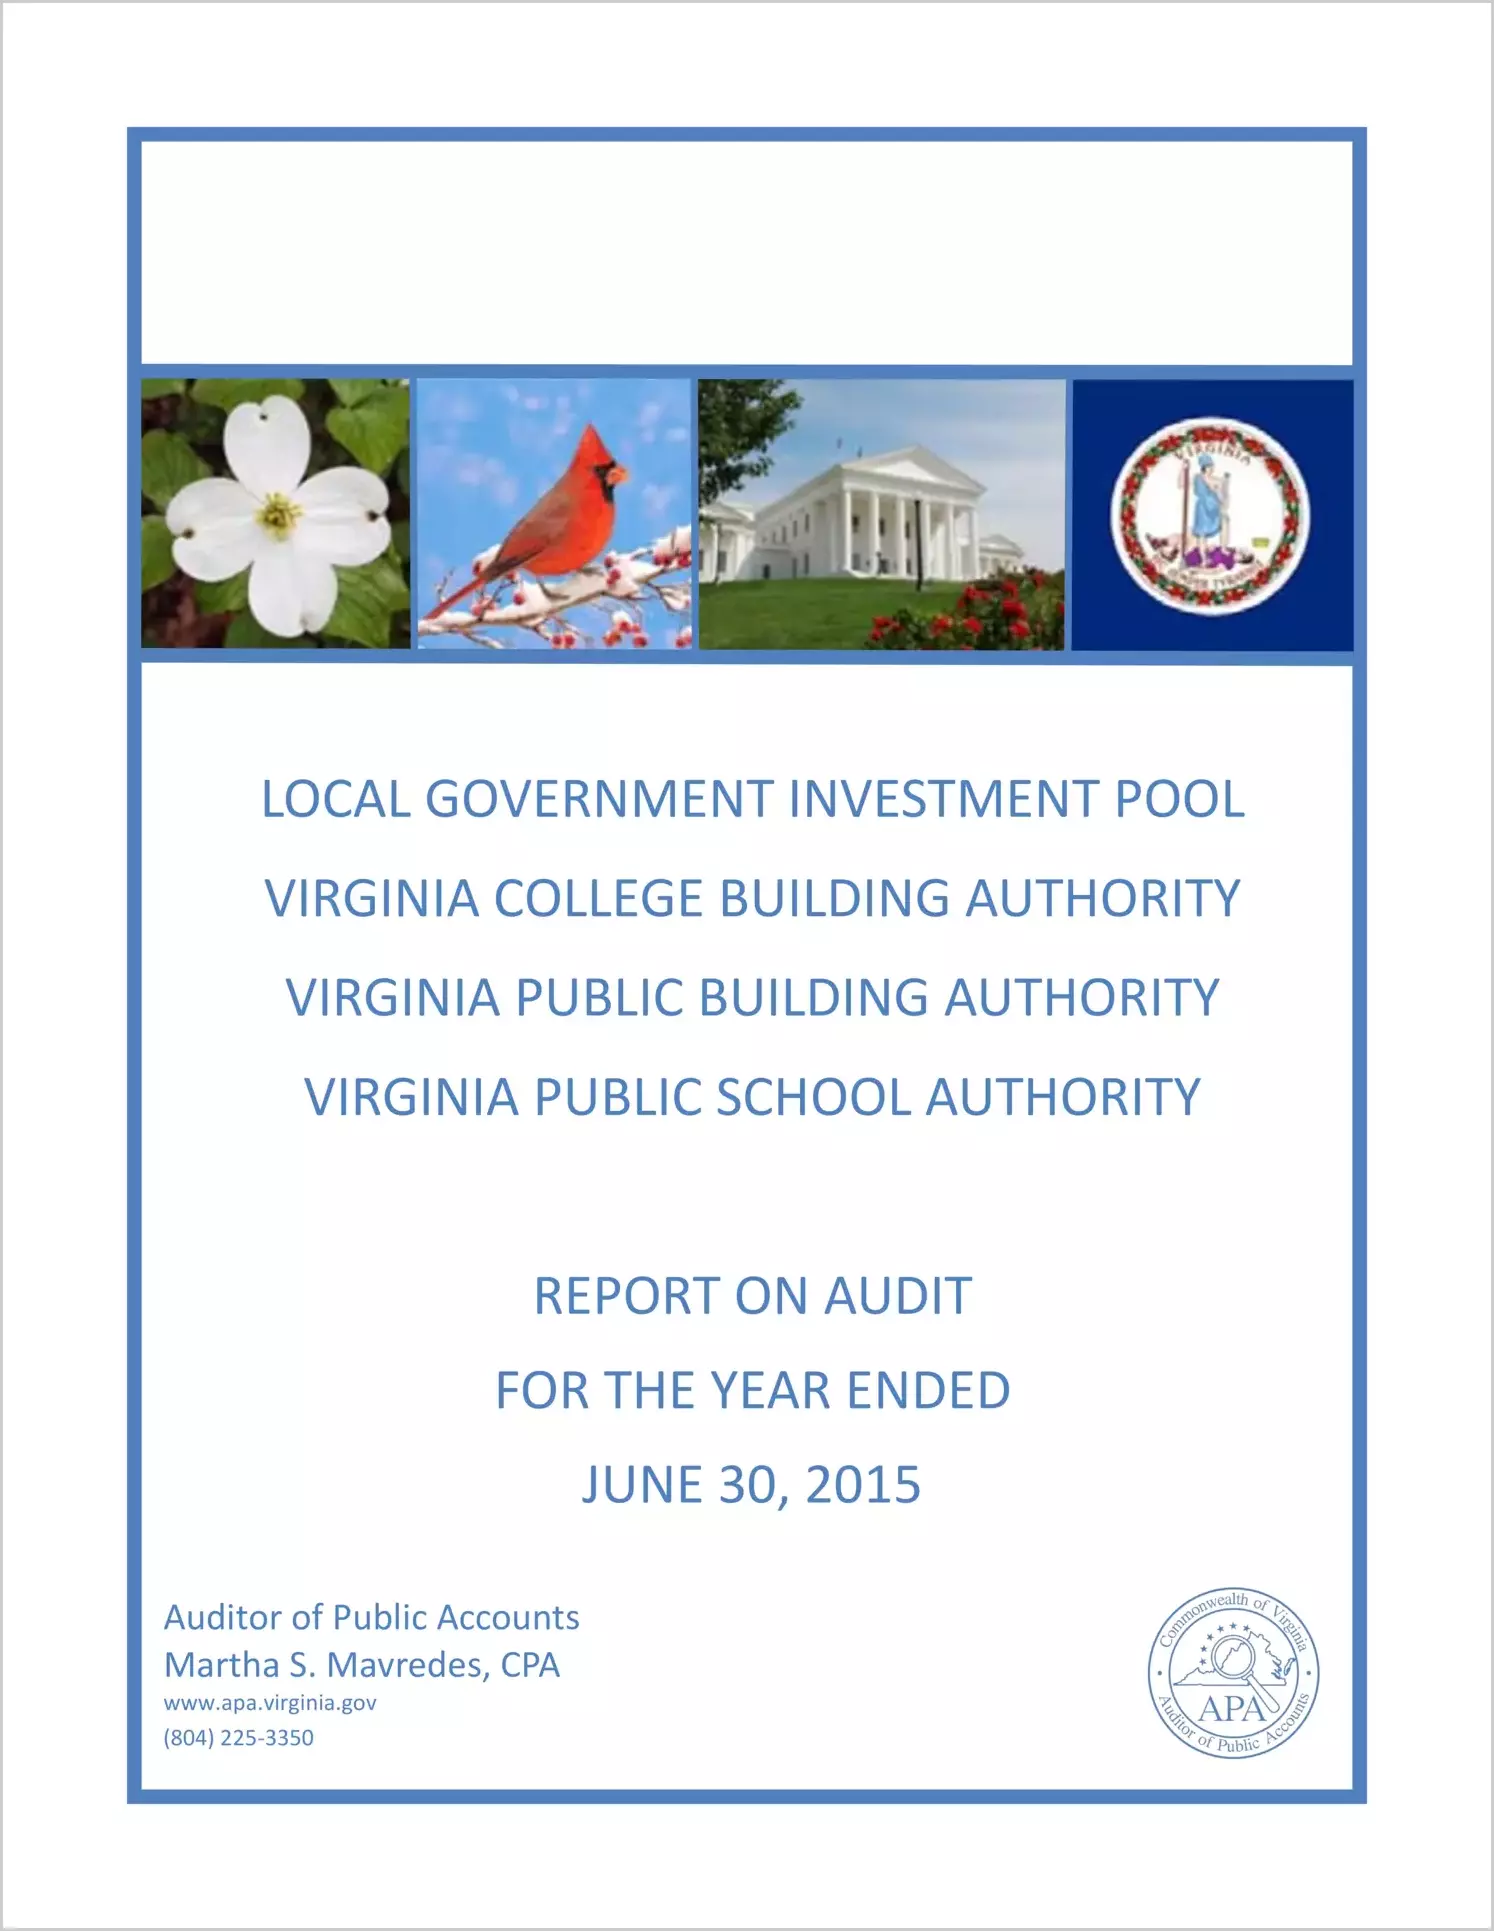 Local Government Investment Pool, Virginia College Building Authority, Virginia Public Building Authority, Virginia Public School Authority Report on Audit for the Year Ended June 30, 2015